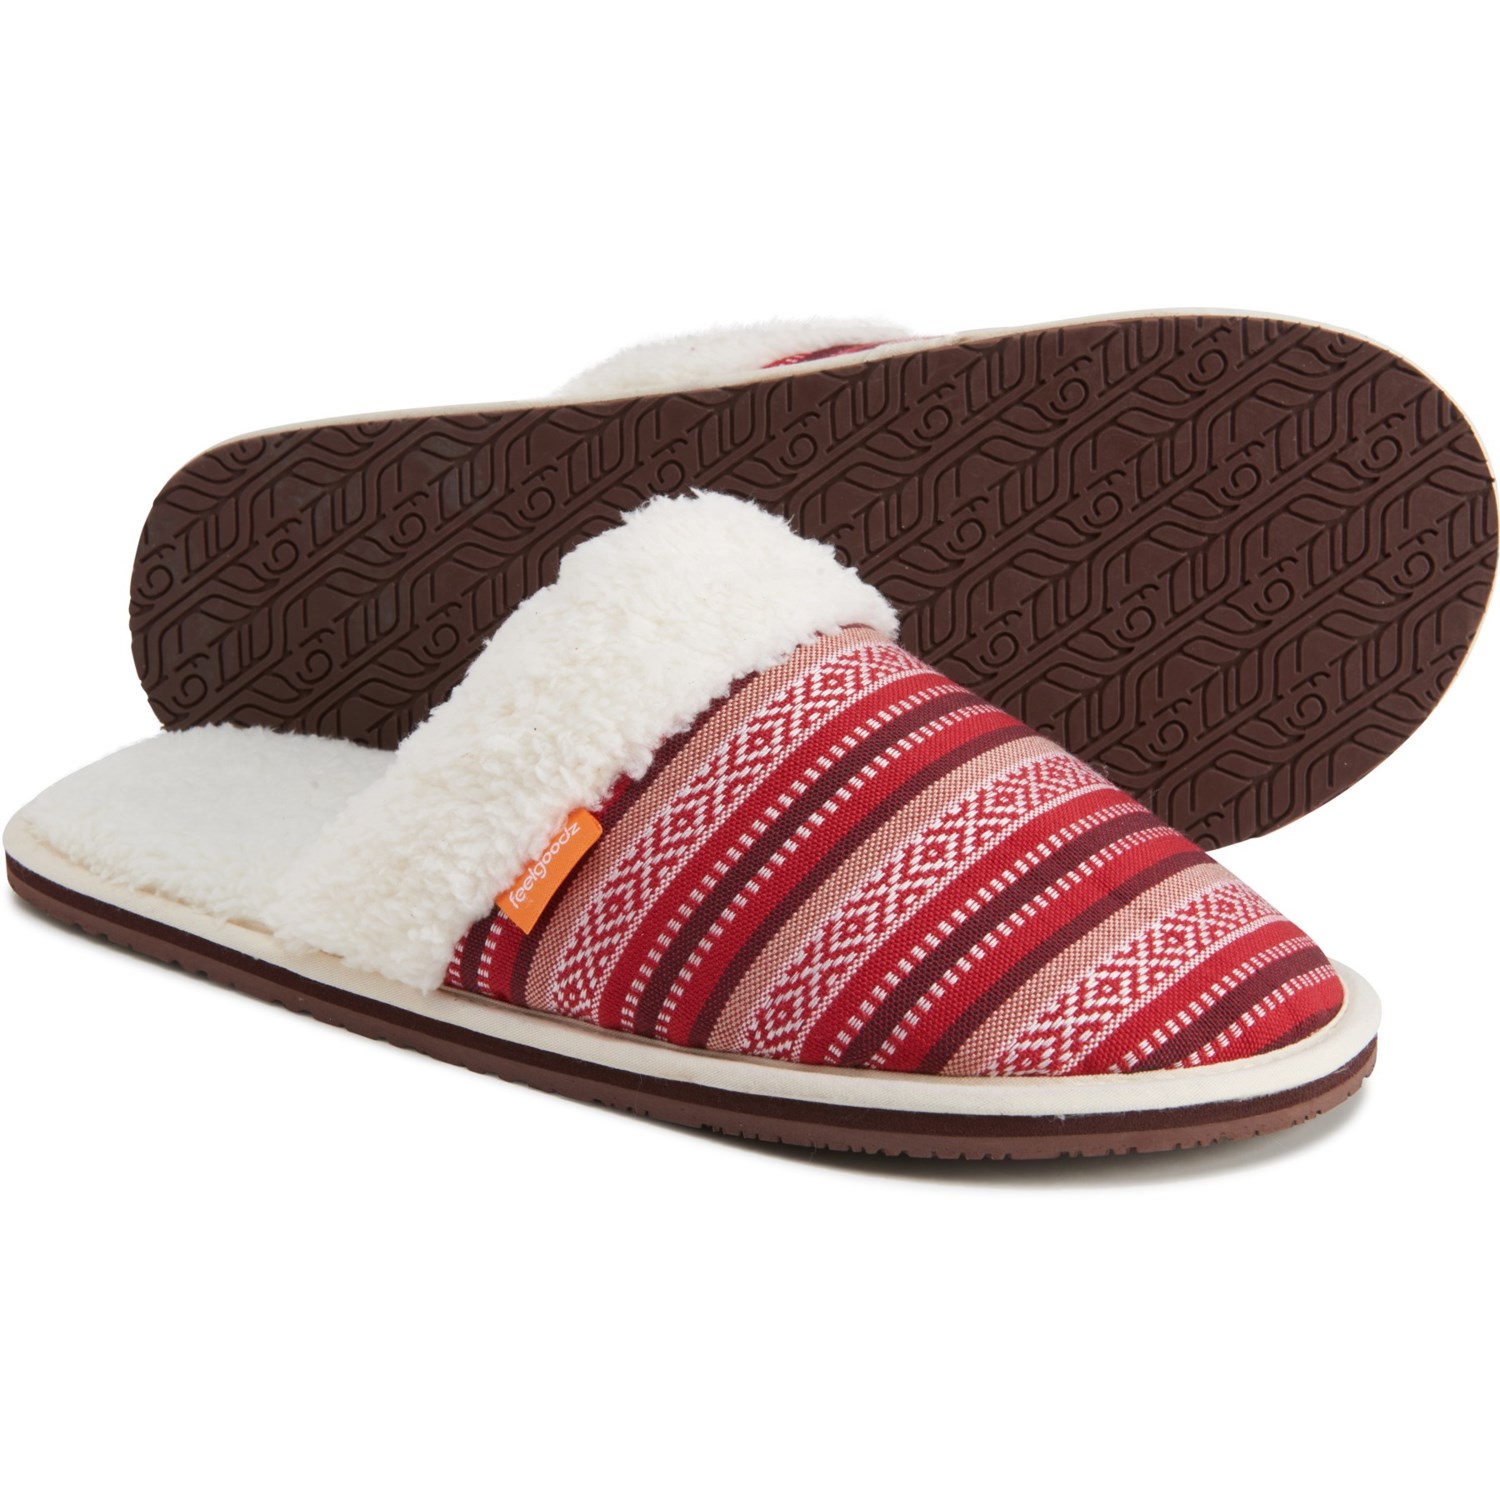 nomad slippers